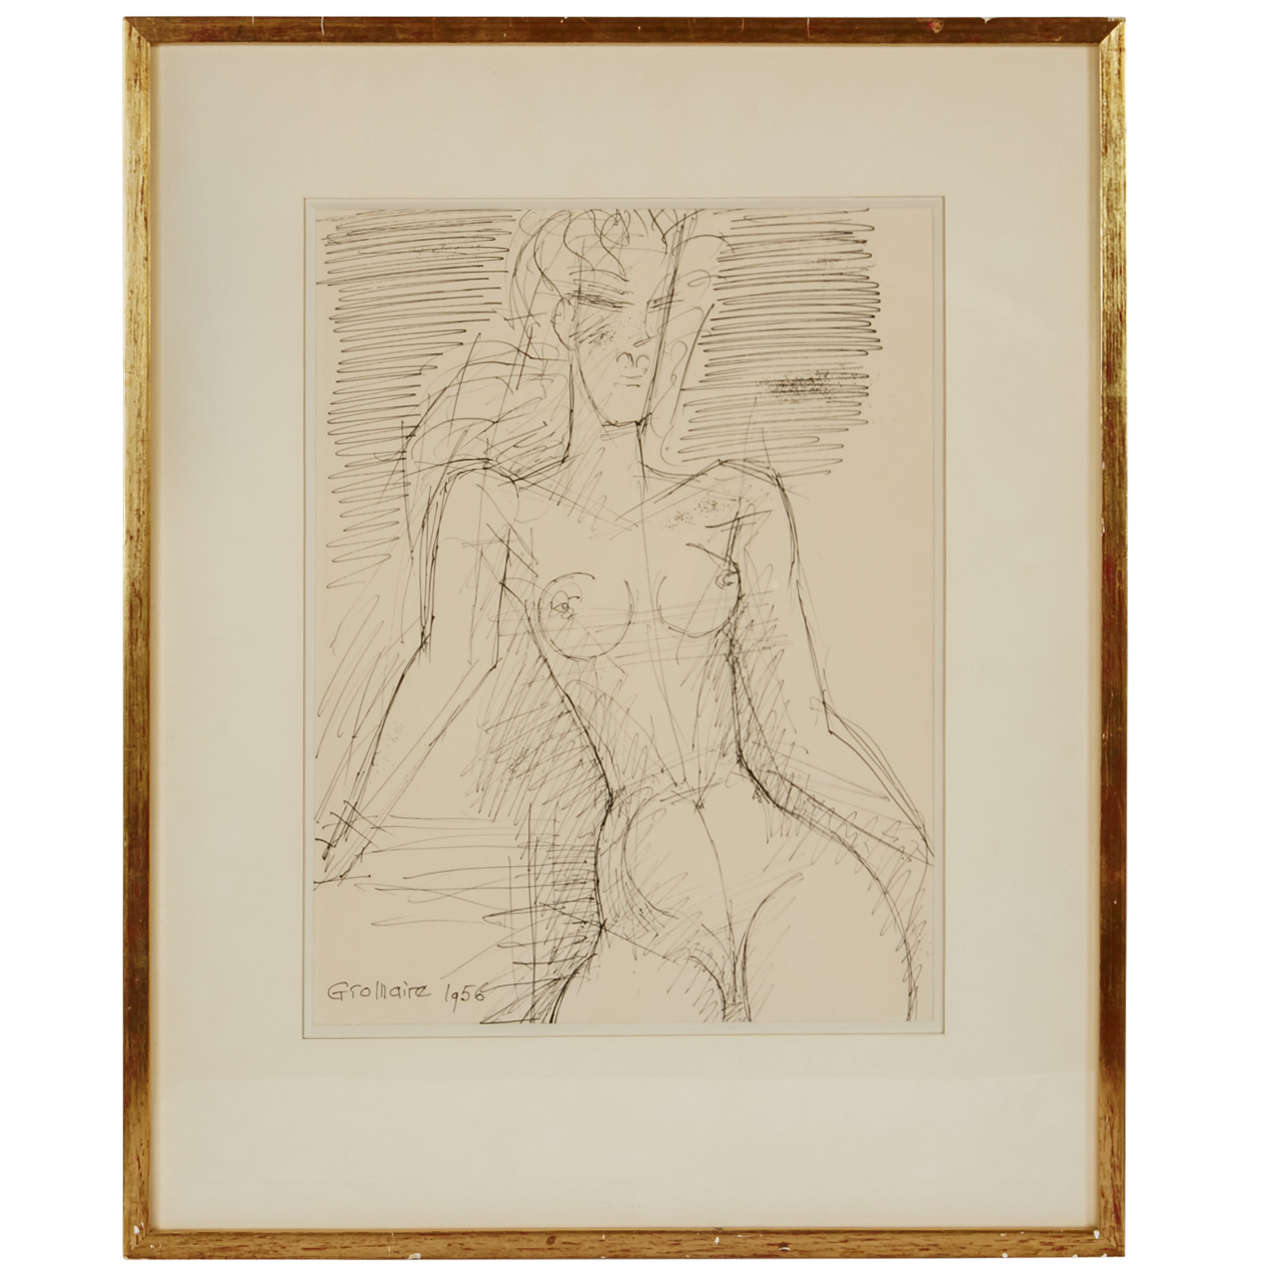 1956 'Femme nue à mi-corps' Drawing by Marcel Gromaire